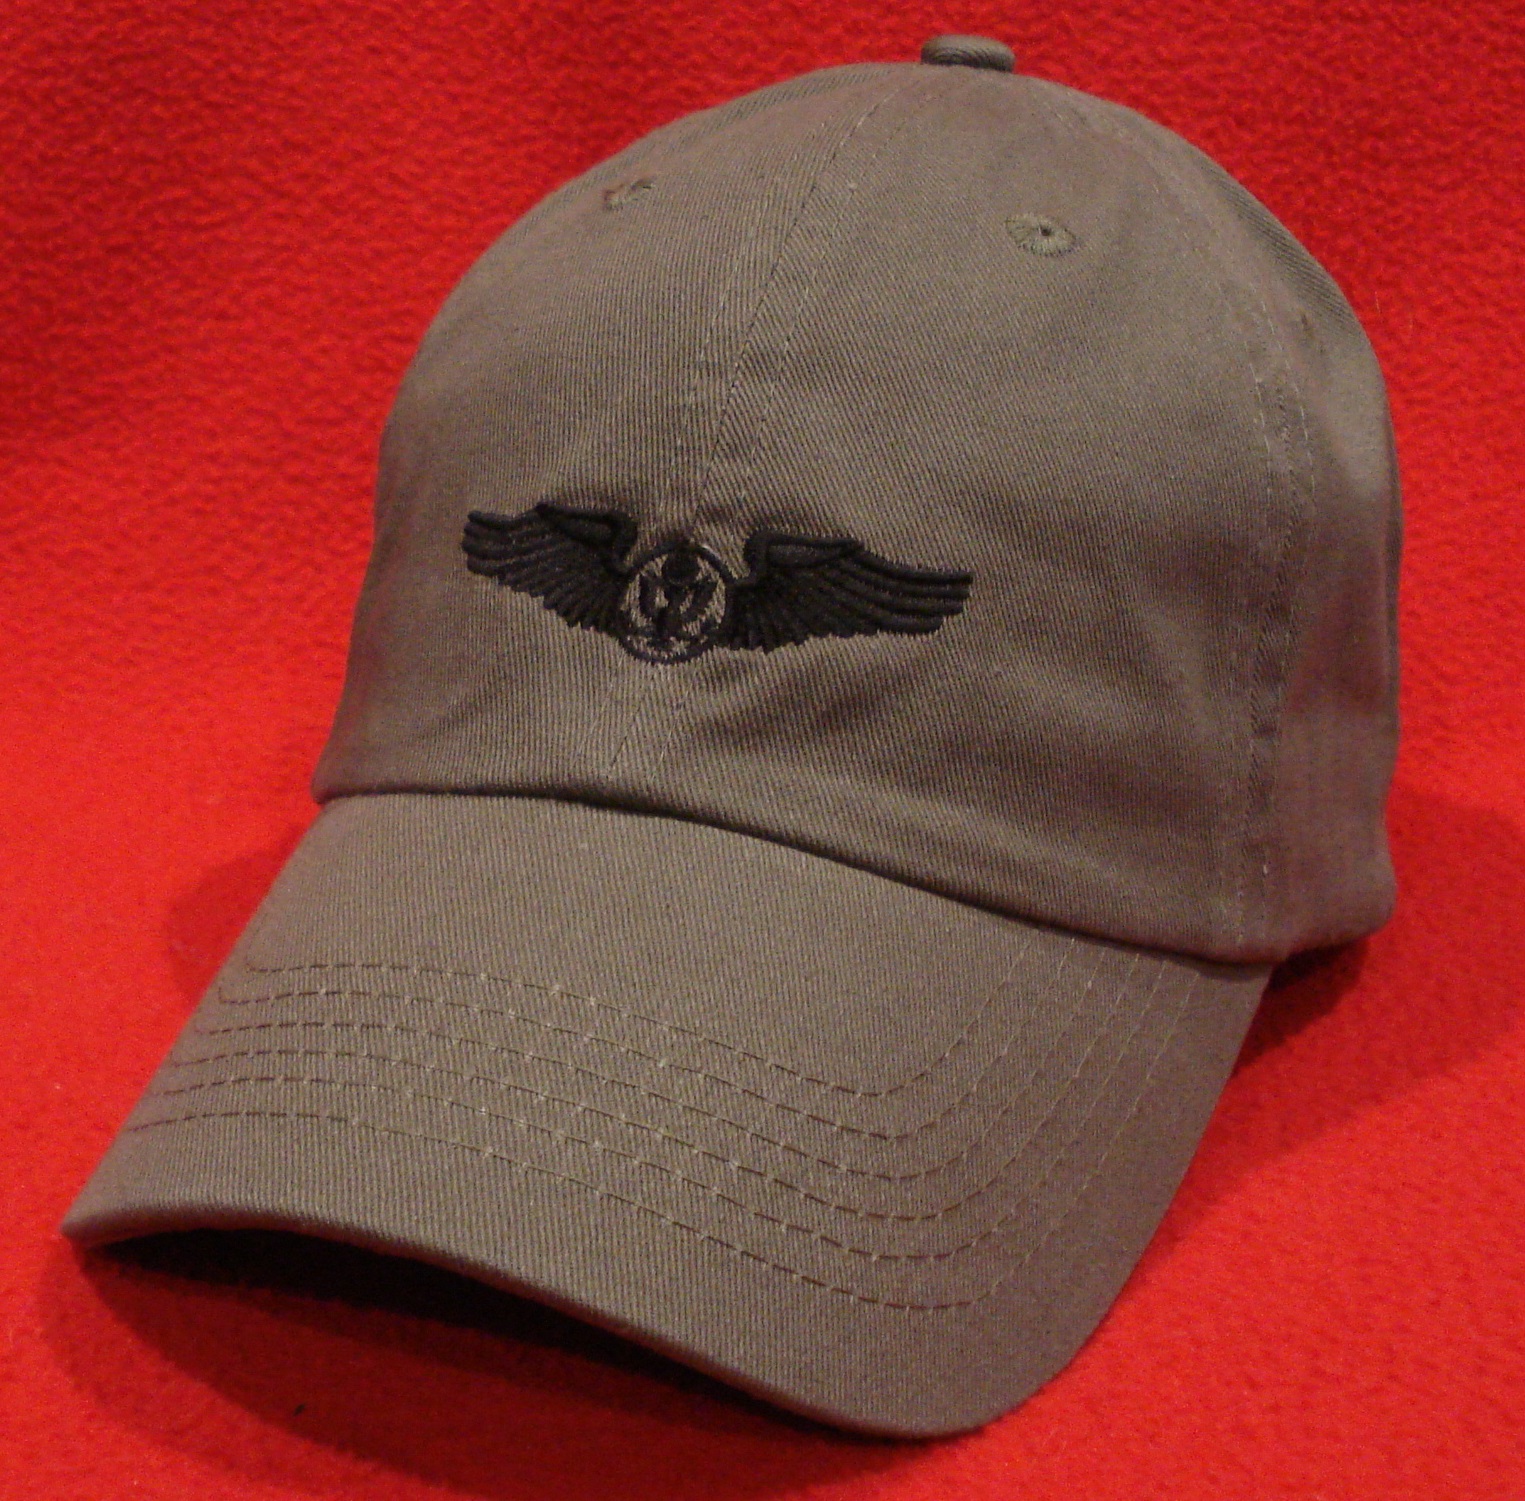 US ARMY AIR CORPS AVIATOR HAT WOWAH USACC CAP PILOT WING HELO FIX WING SOLO GIFT 